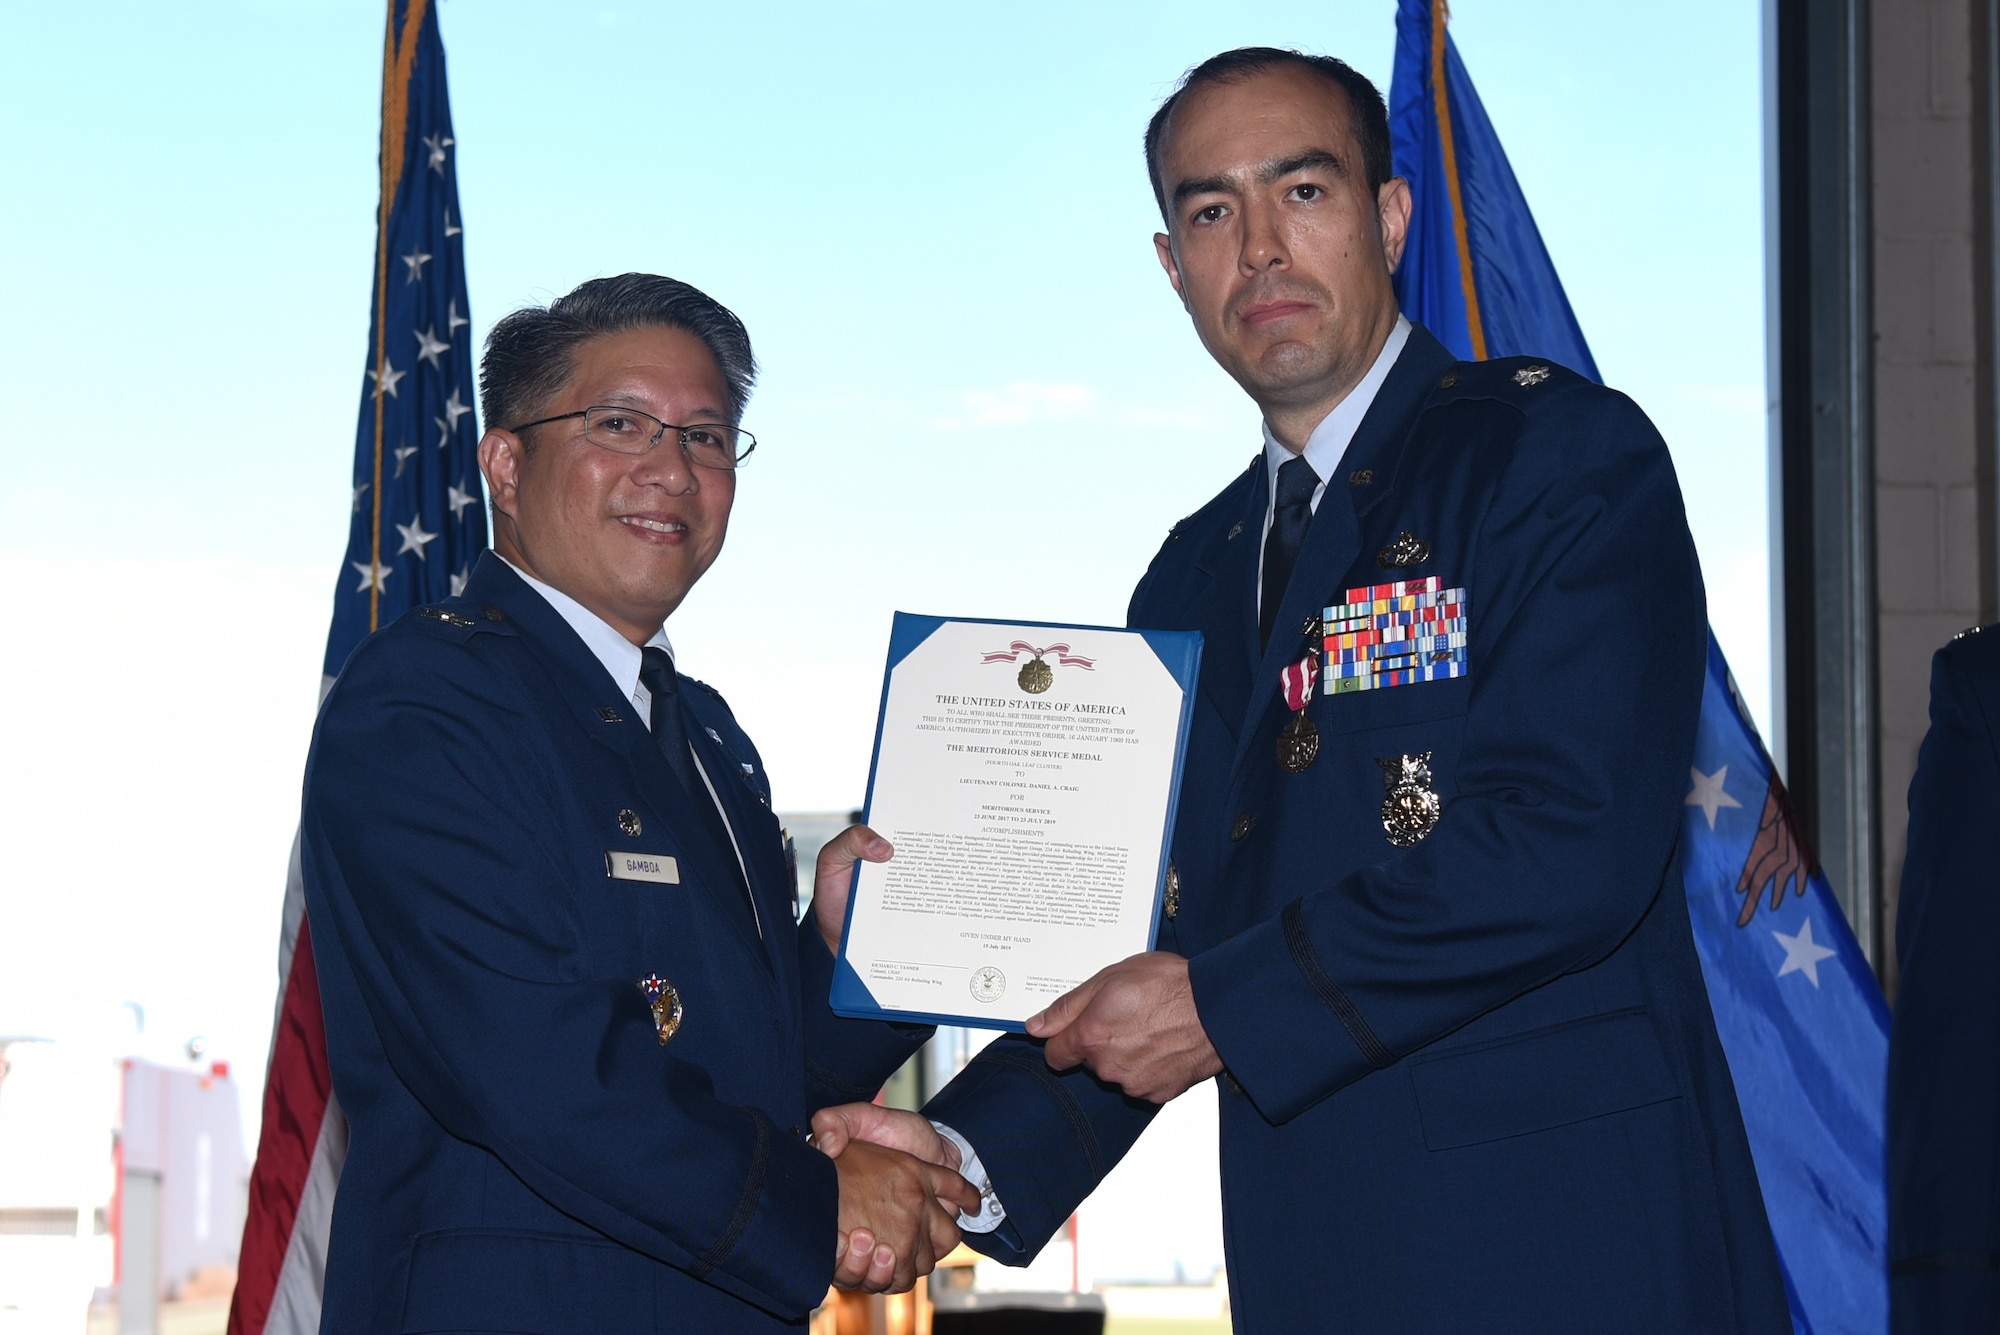 Col. Anthony Gamboa, 22nd Mission Support Group commander, presents the Meritorious Service Medal to Lt. Col. Daniel Craig, outgoing 22nd Civil Engineering Squadron commander, during a change of command ceremony July 16, 2019, at McConnell Air Force Base, Kan. The medal was awarded for Craig’s outstanding meritorious conduct in the performance of exceptional services during his time at McConnell. (U.S. Air Force photo by Airman 1st Class Alexi Myrick)